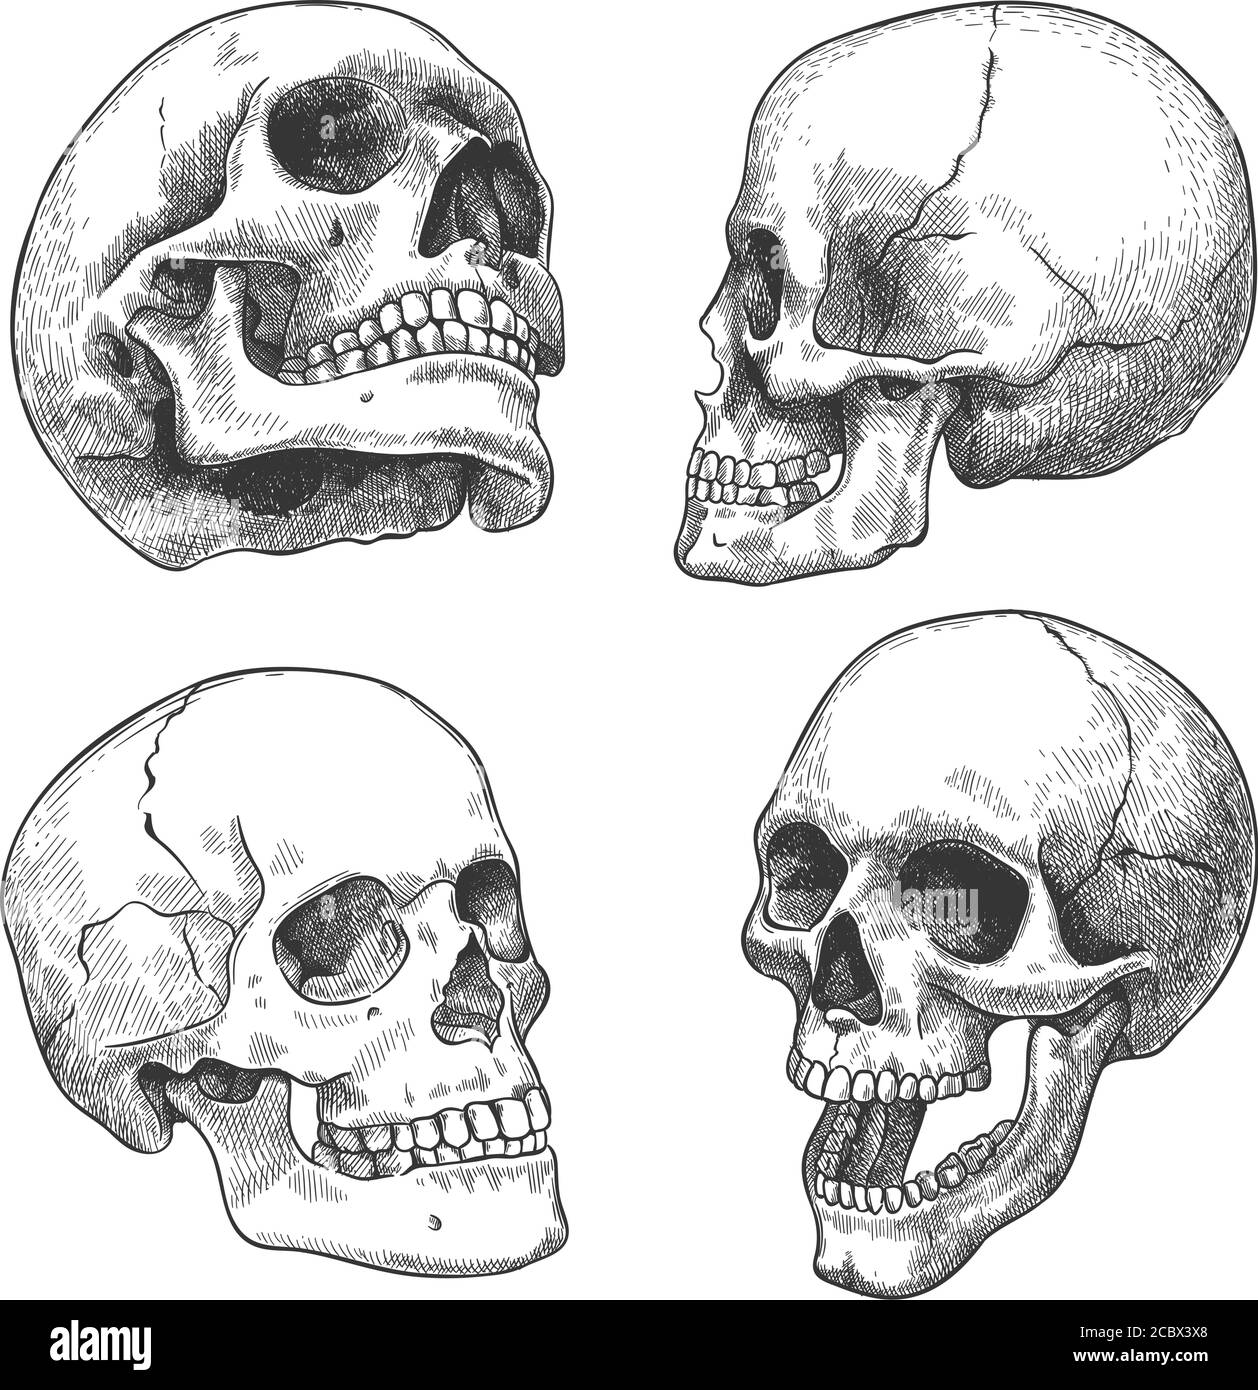 How to draw a skull step by step  Adobe